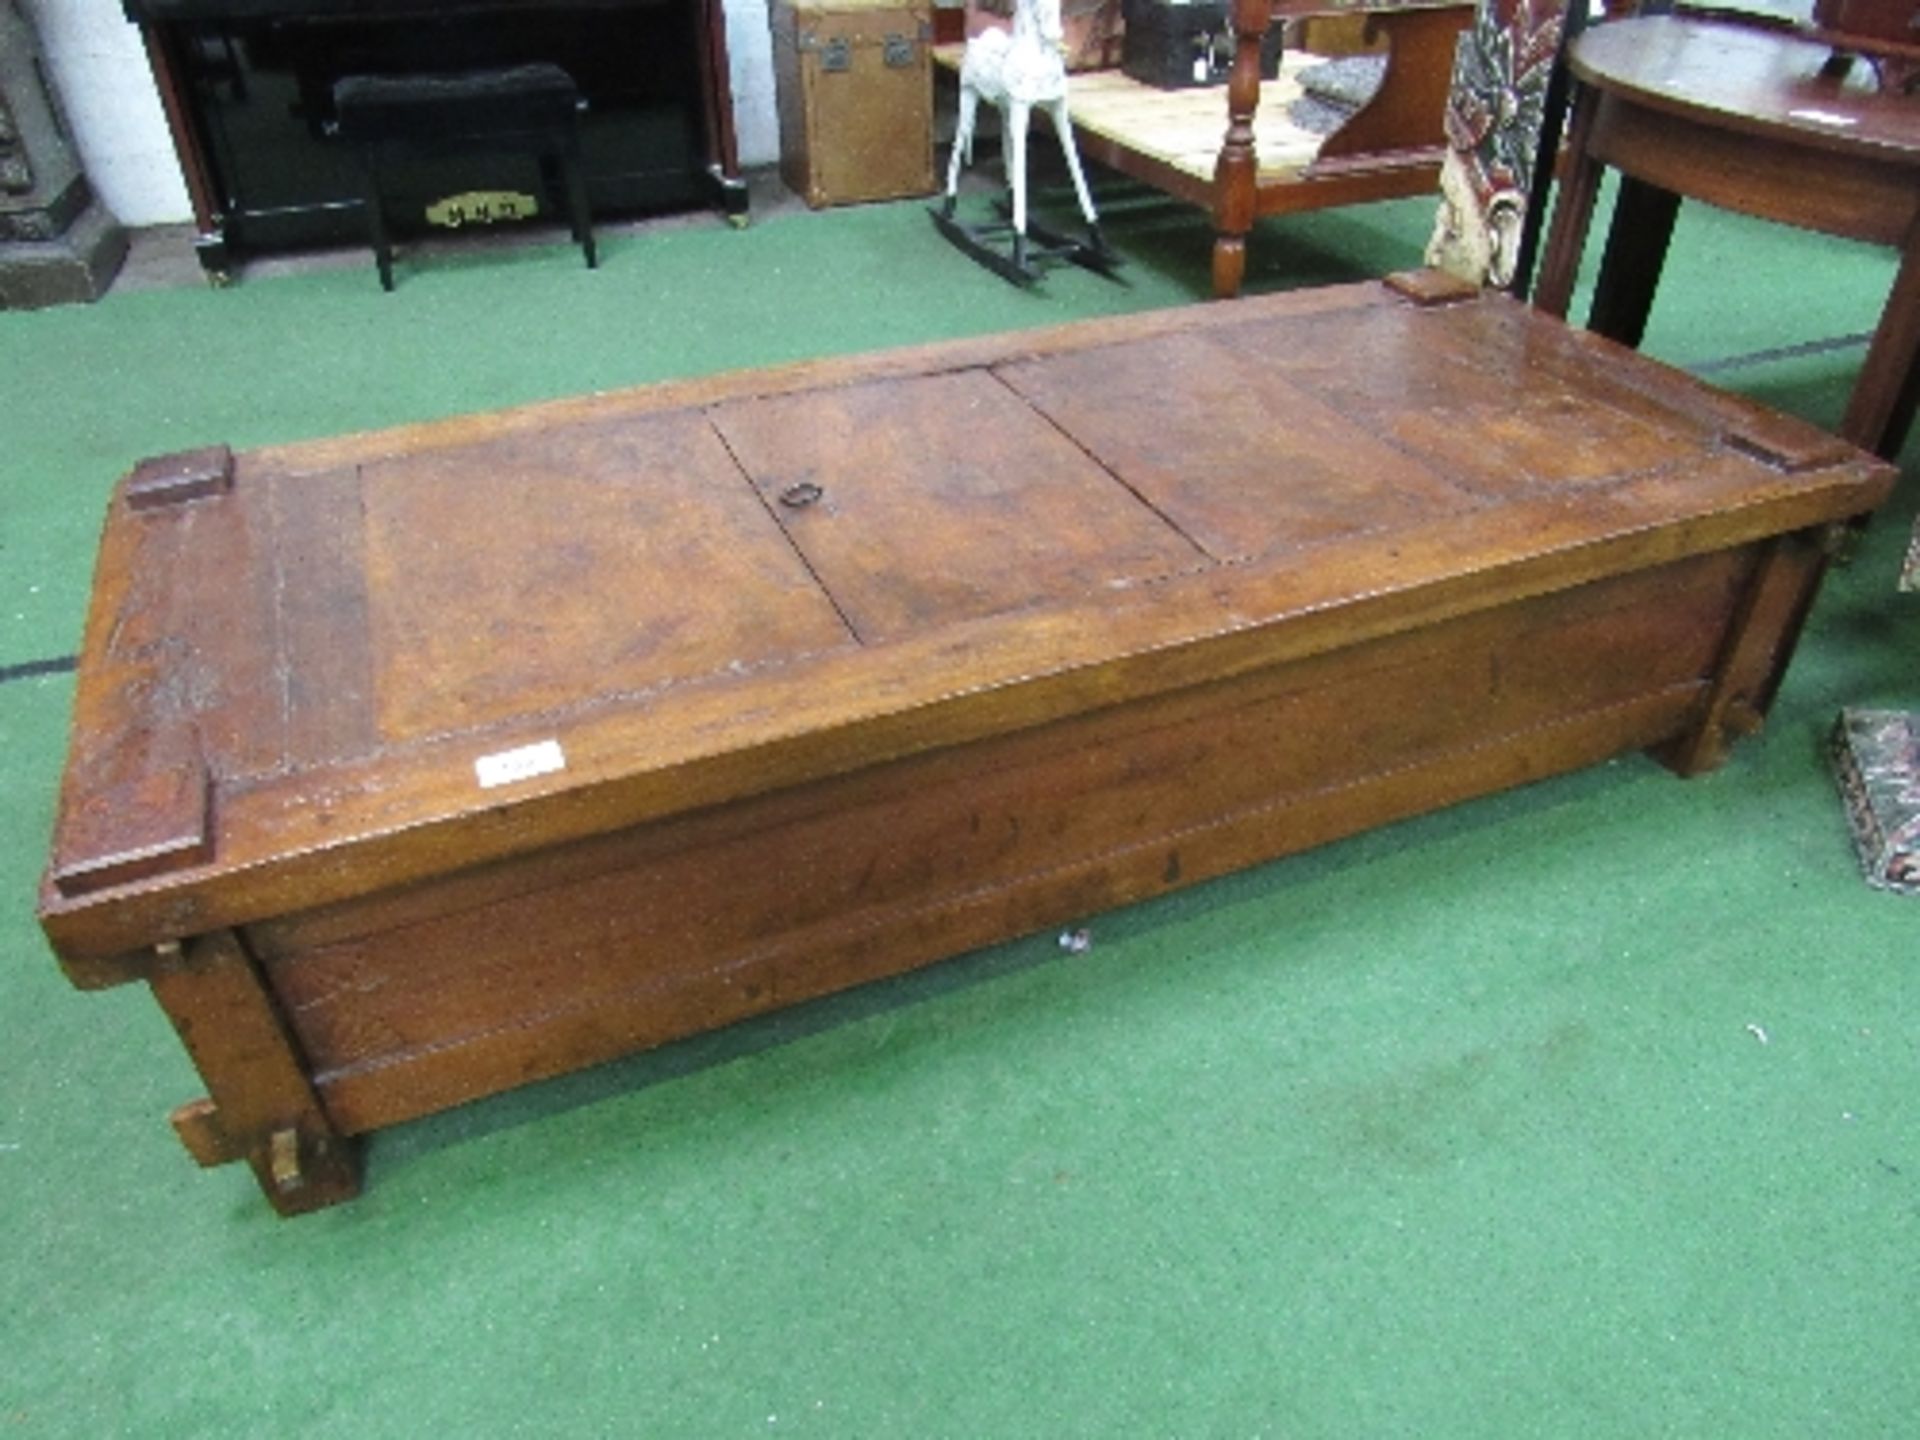 Antique Indonesian rice bed with central hatch door for access to internal storage, 72" x 31" x 17"